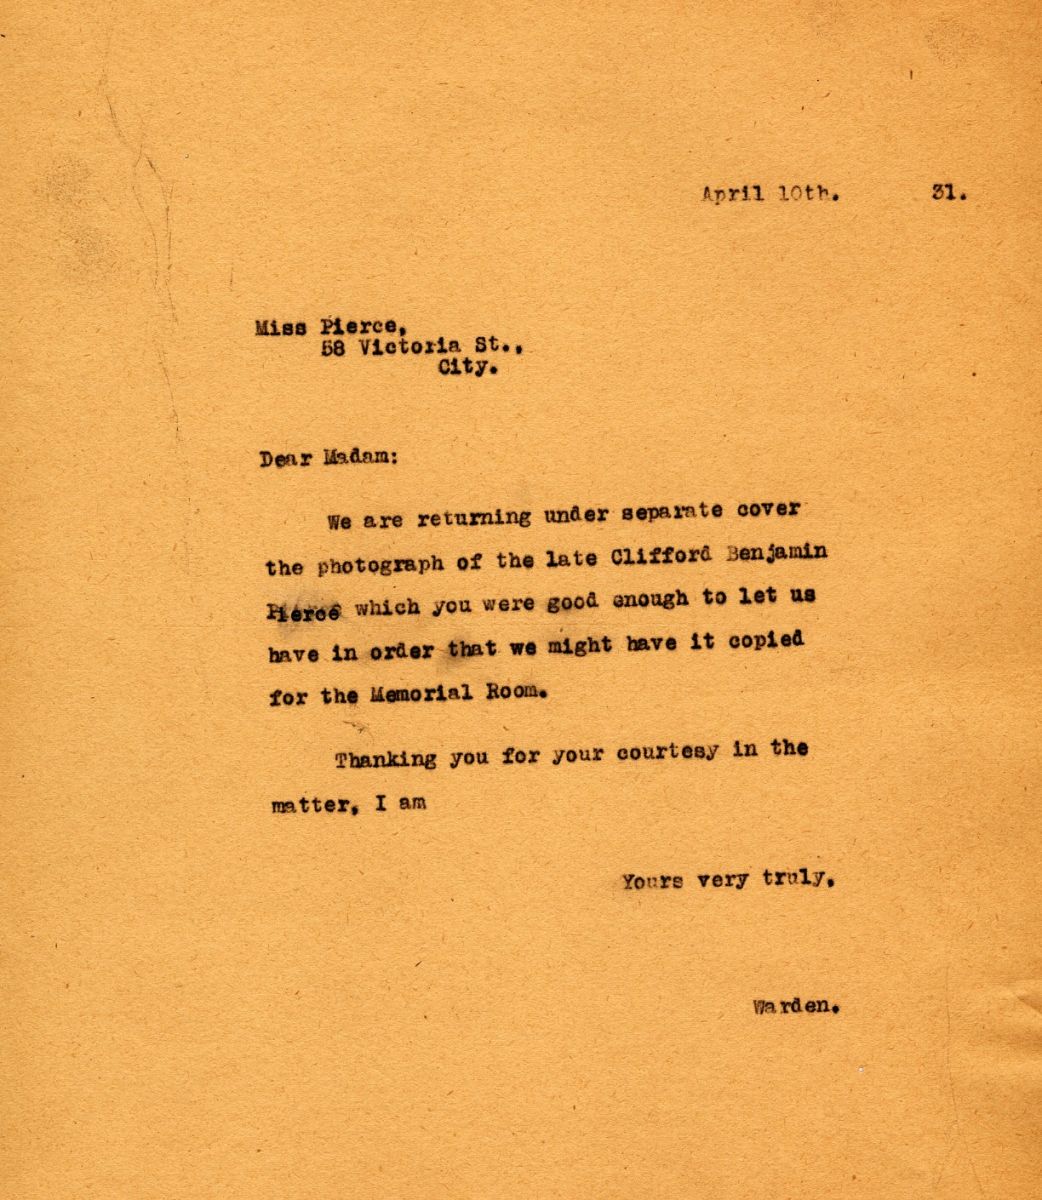 Letter from the Warden to Miss Pierce, 10th April 1931